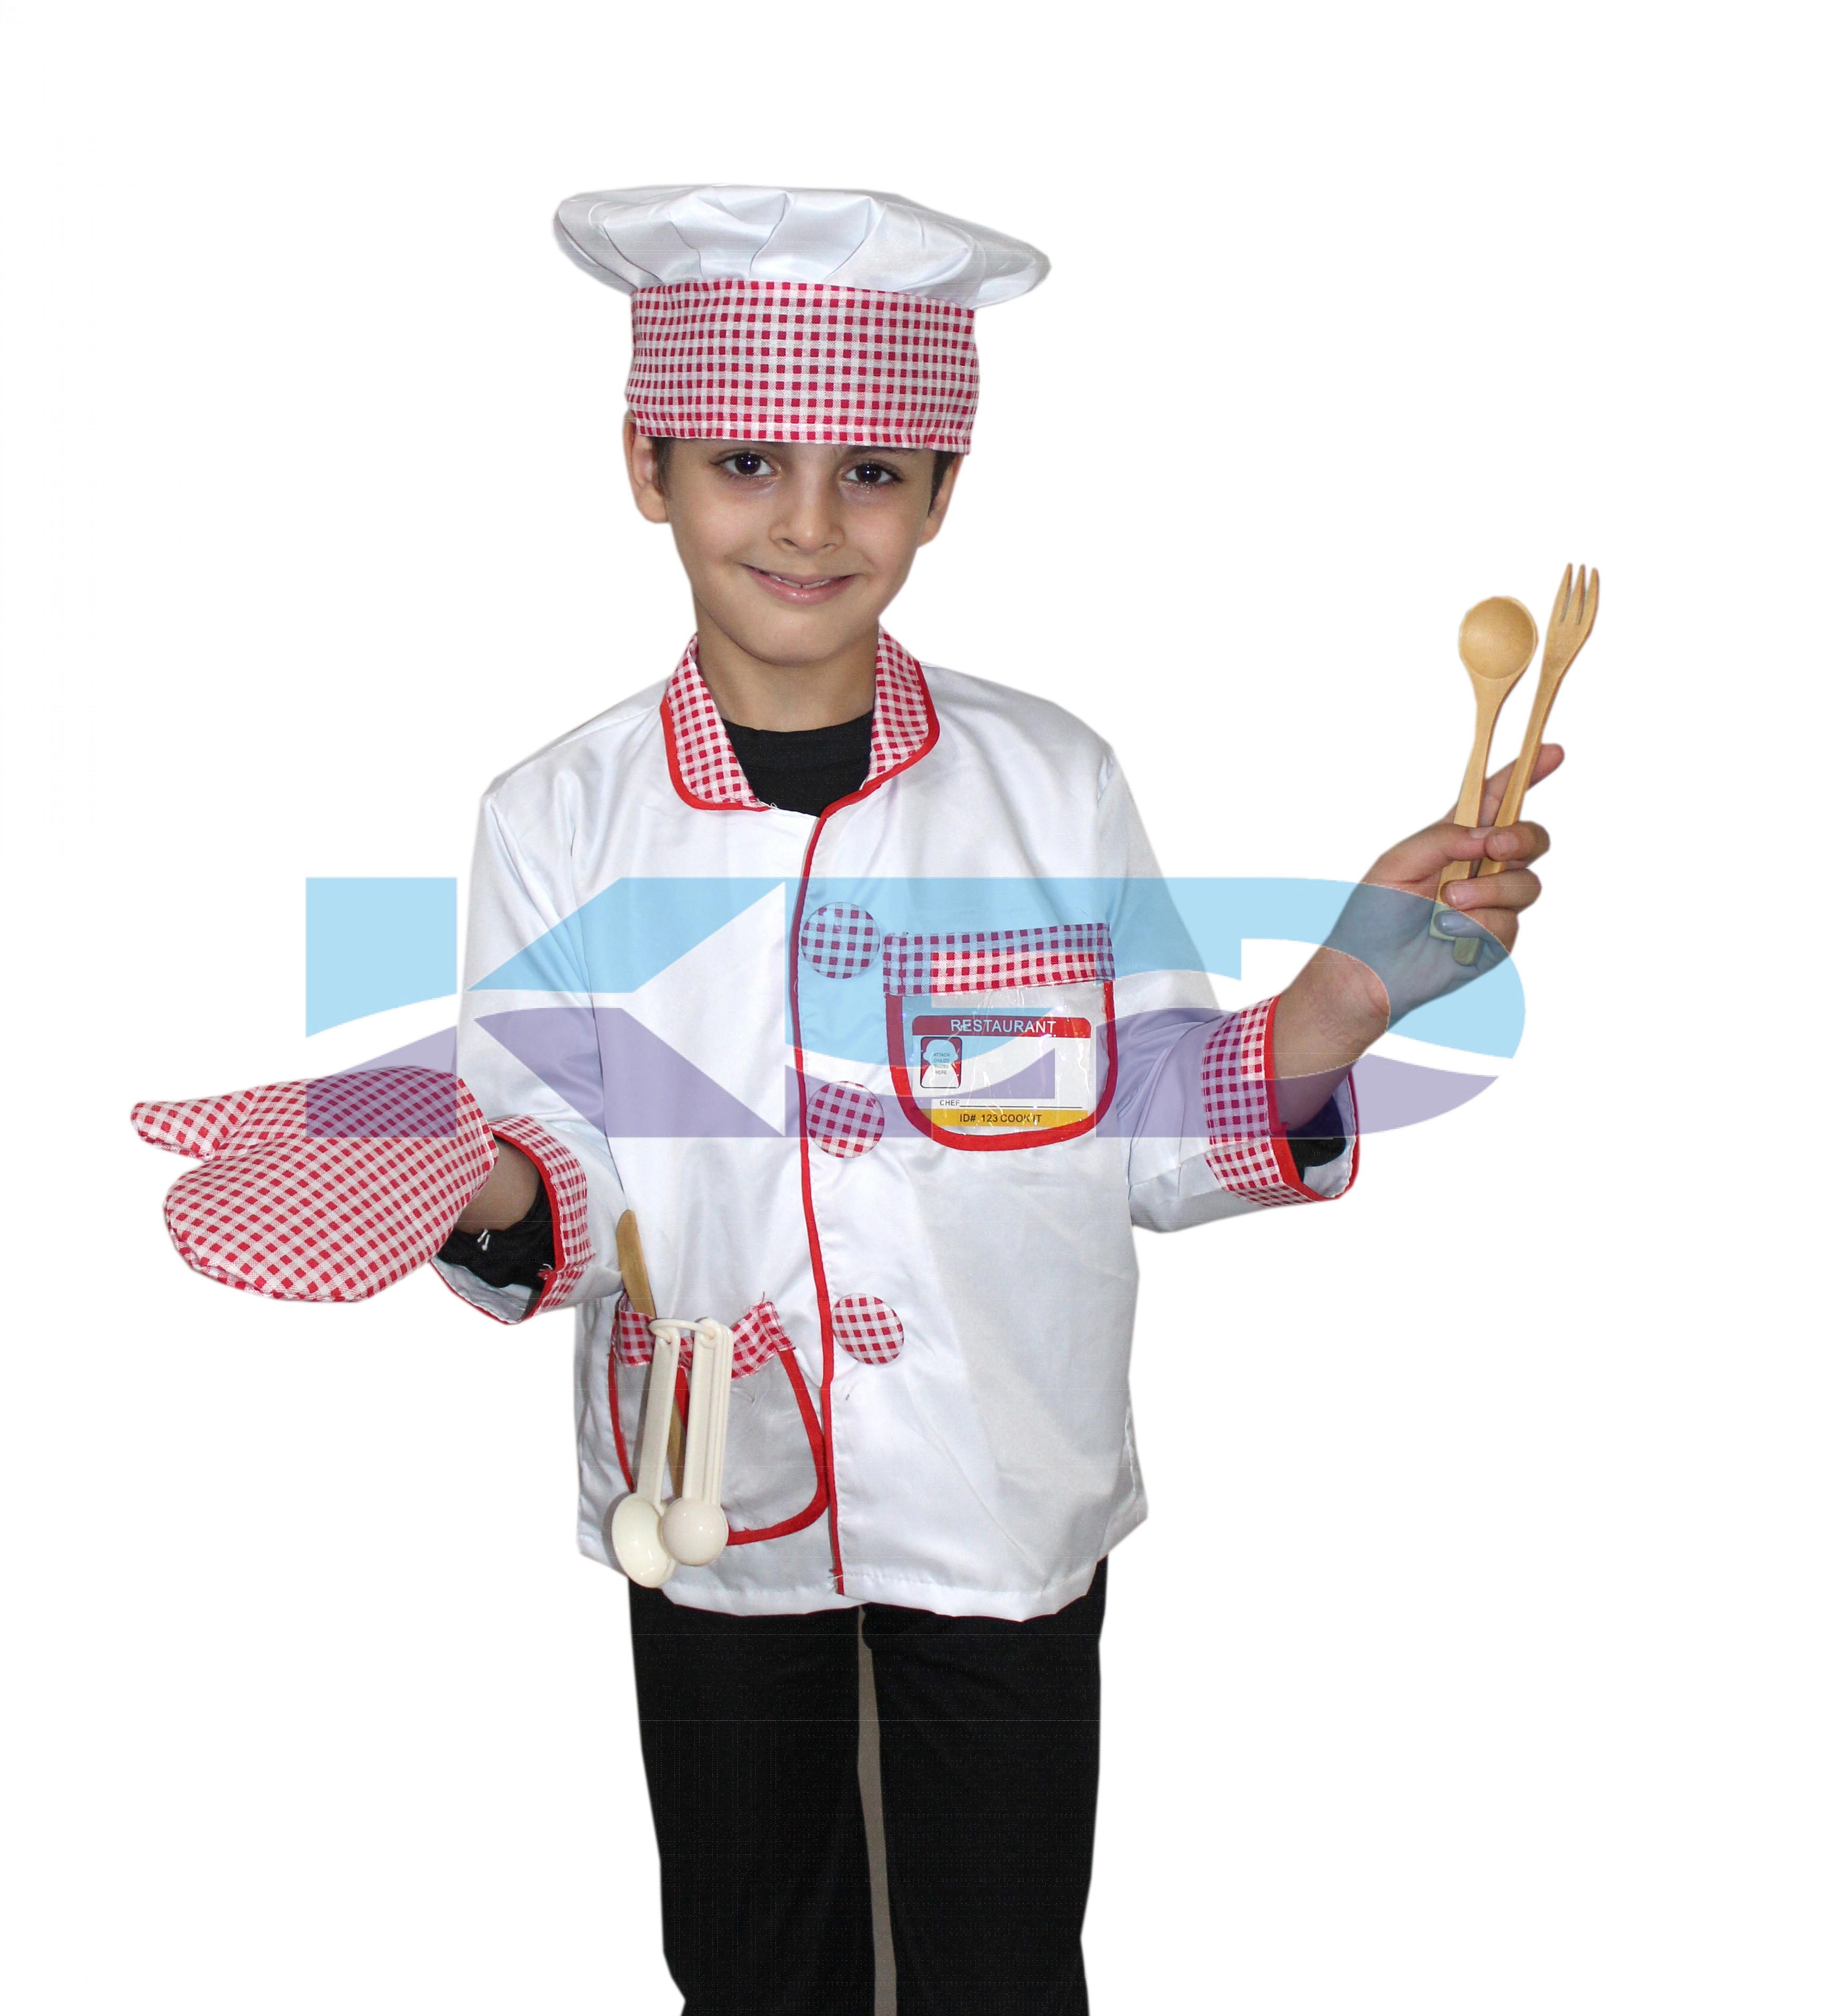  Chef Costume,Our Helper Costume for School Annual function/Theme Party/Competition/Stage Shows/Birthday Party Dress